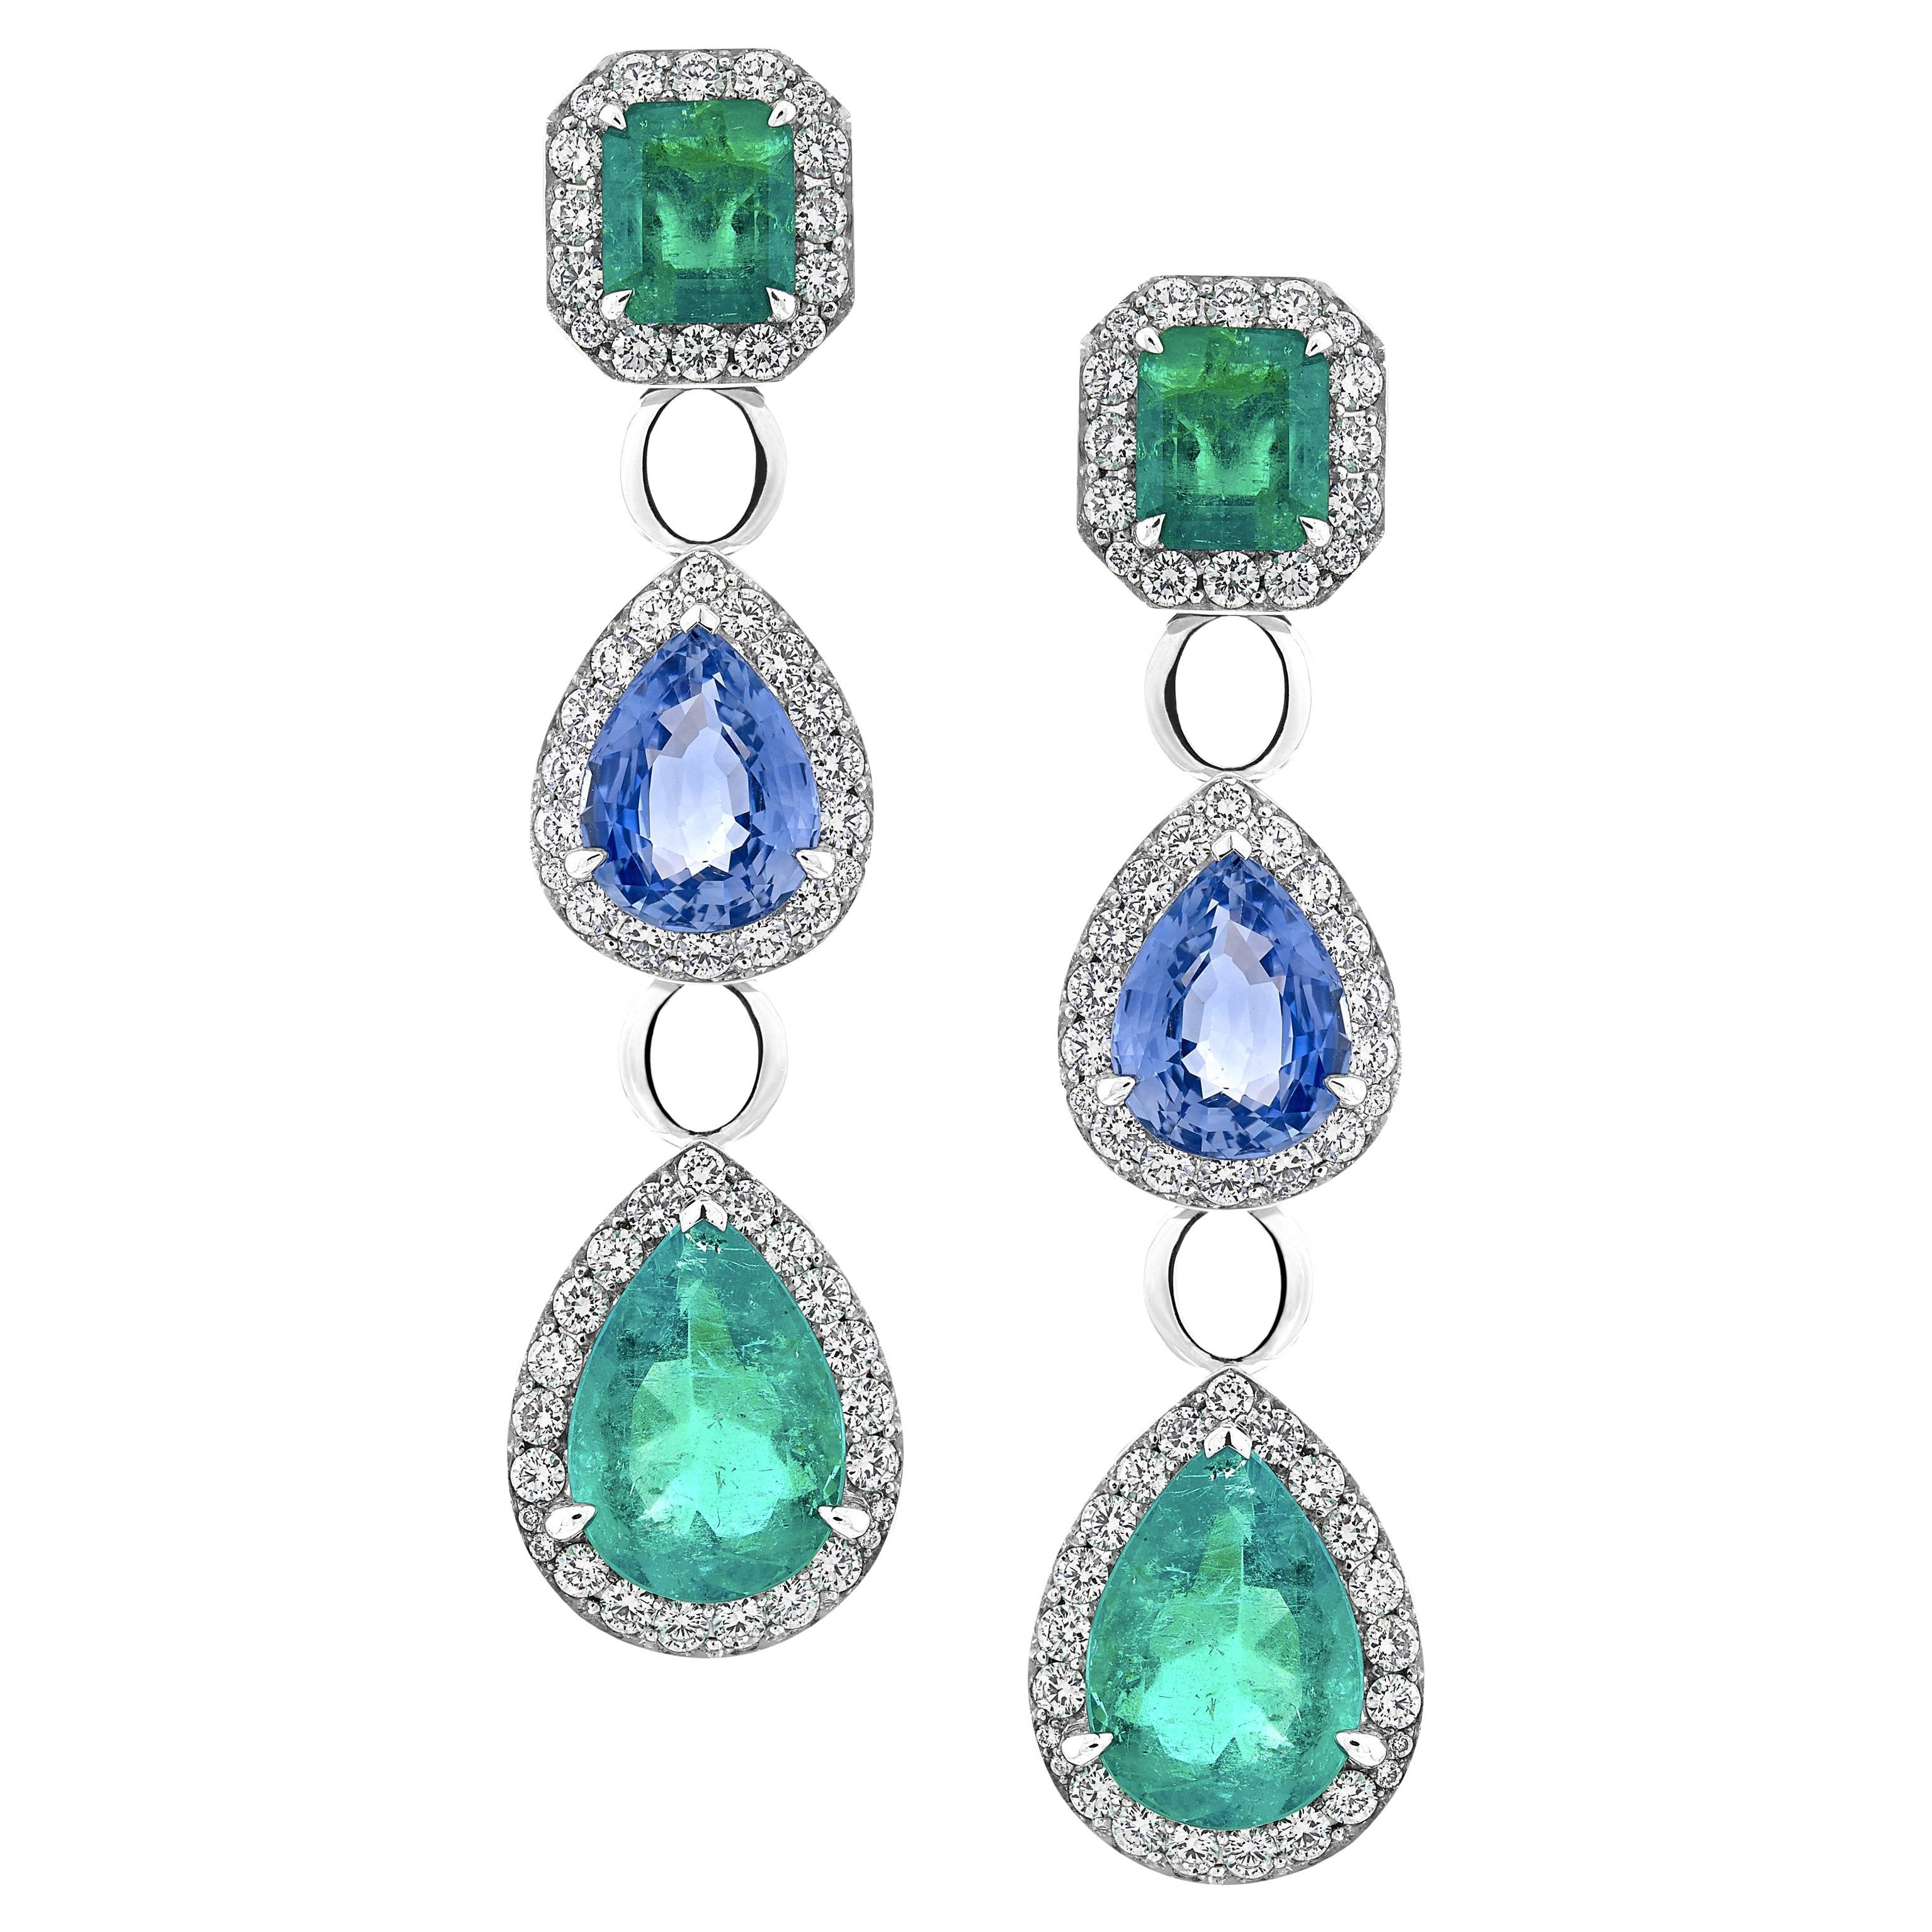 5.4 Carat Emerald and 3.93 Carat Blue Sapphire Diamond Earrings in 18 White Gold